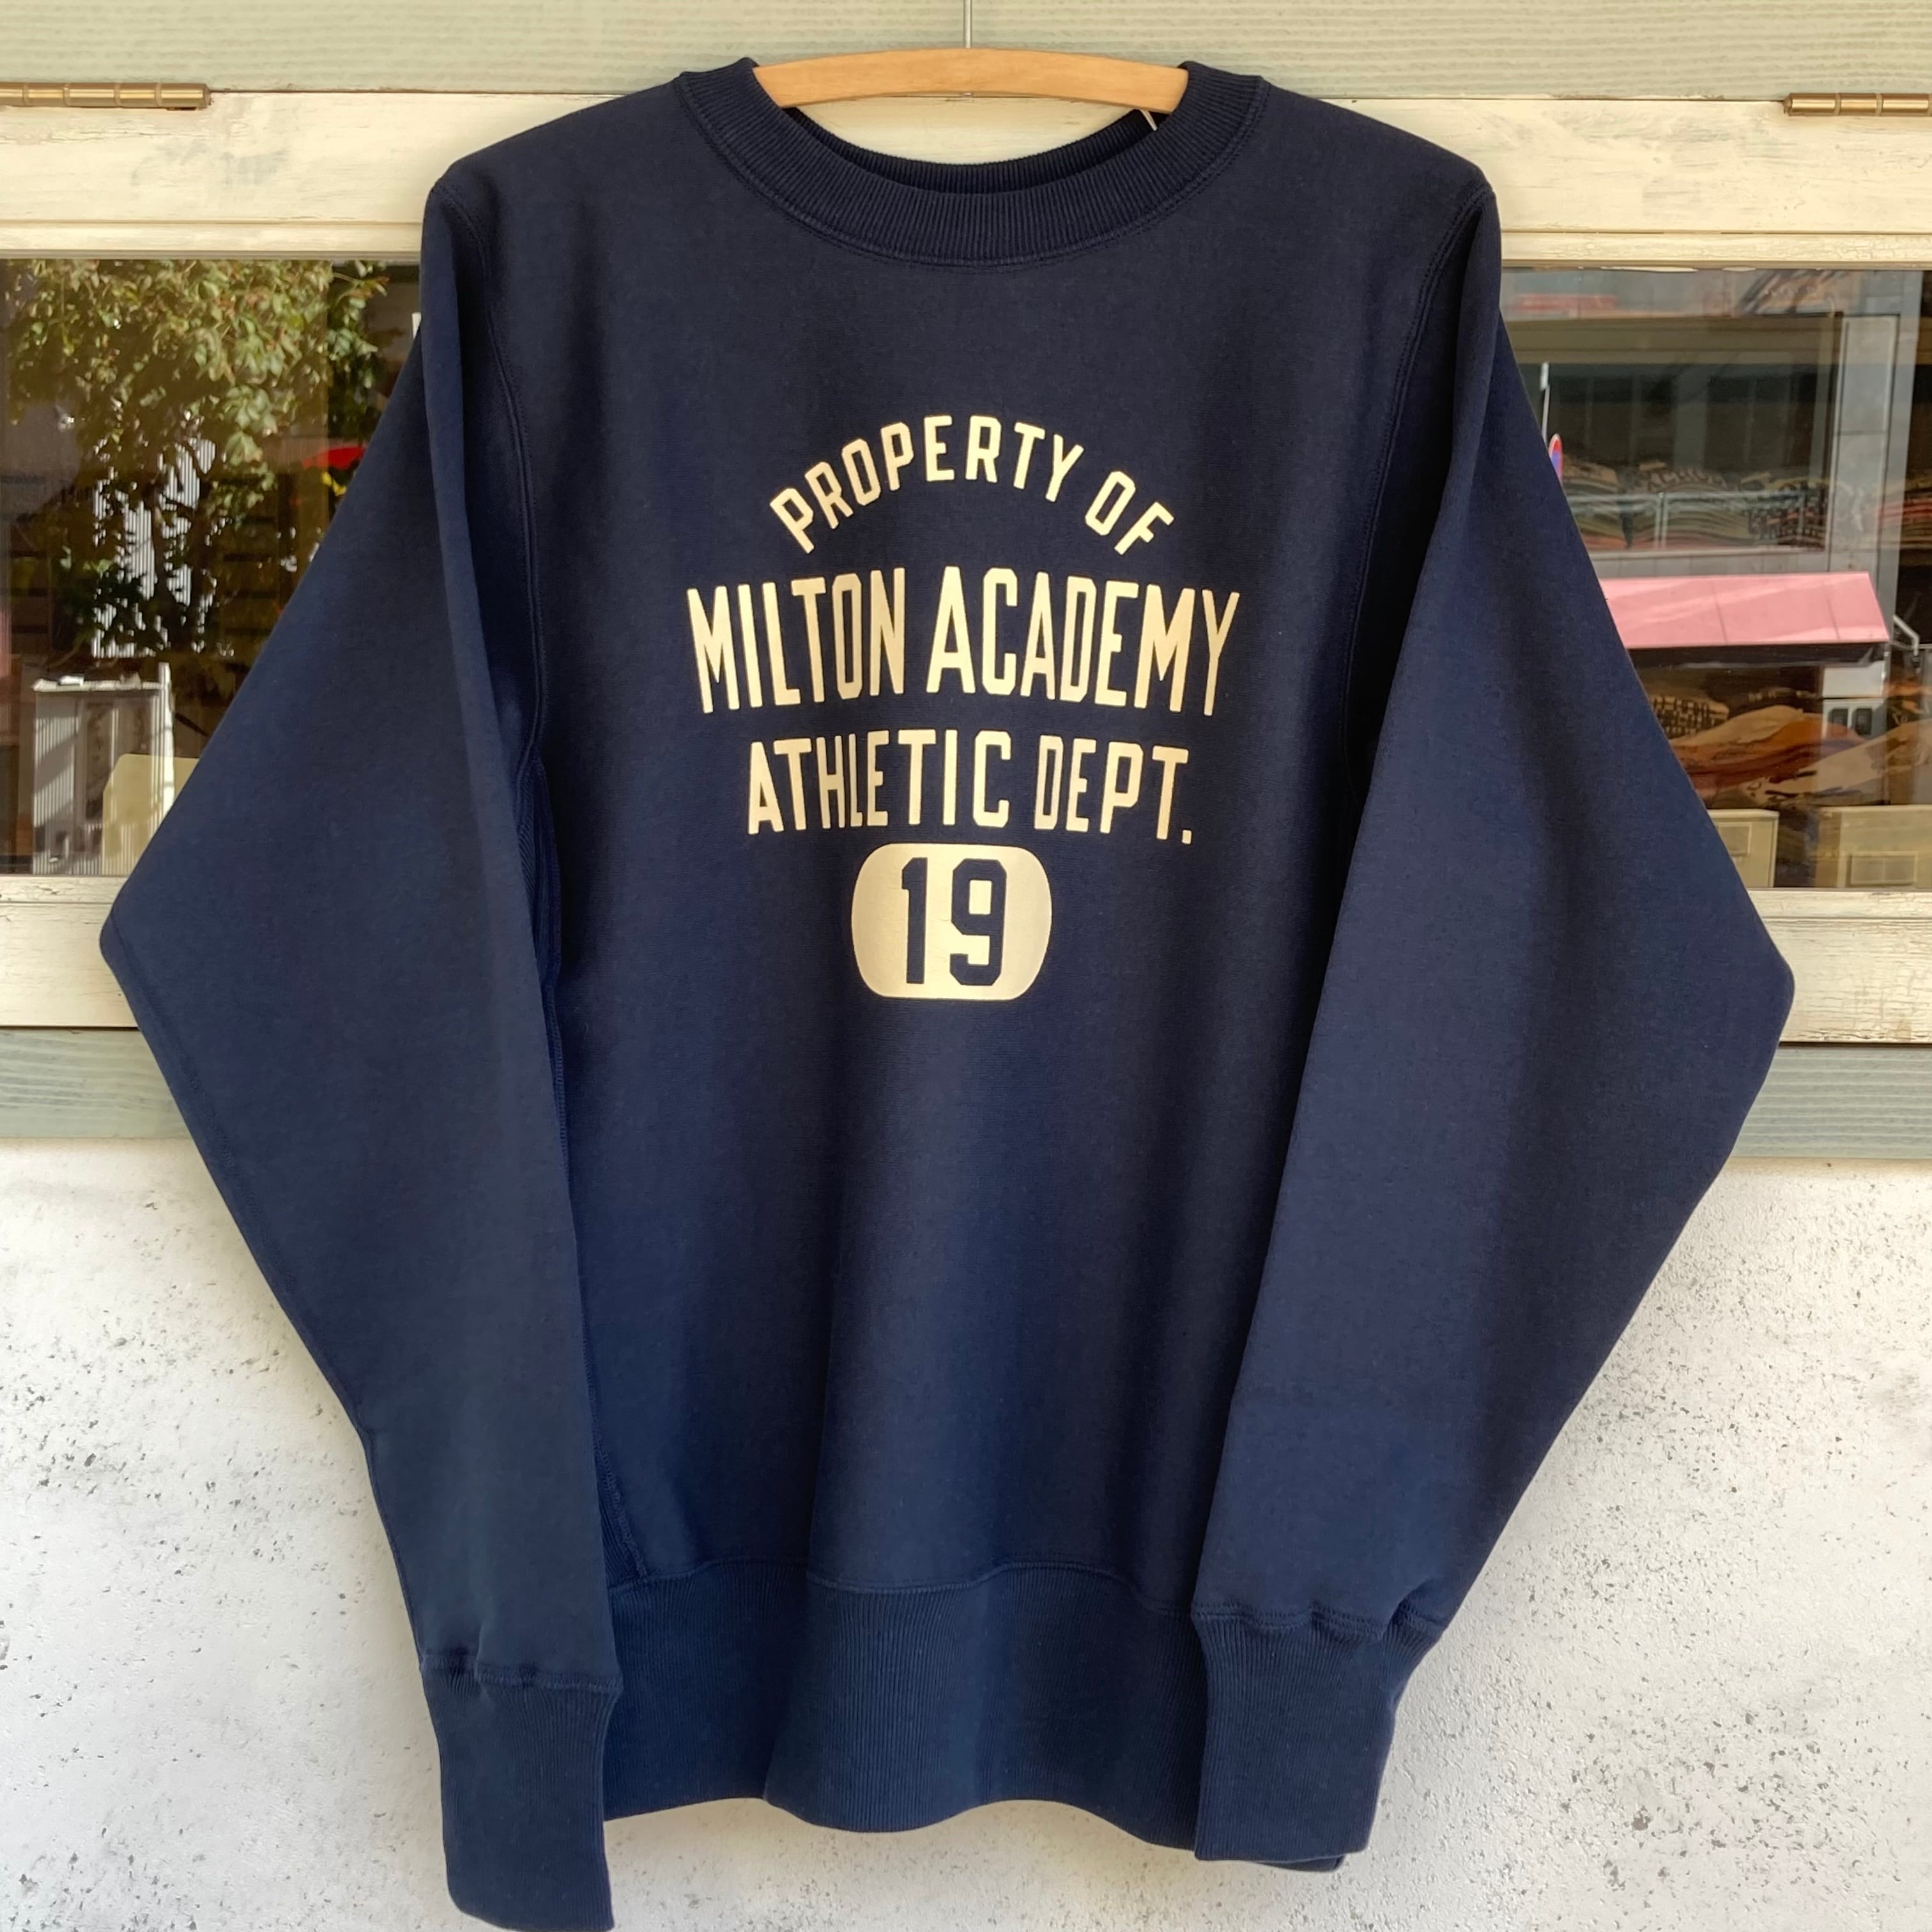 WAREHOUSE 483 MILTON ACADEMY | union online shop powered by BASE